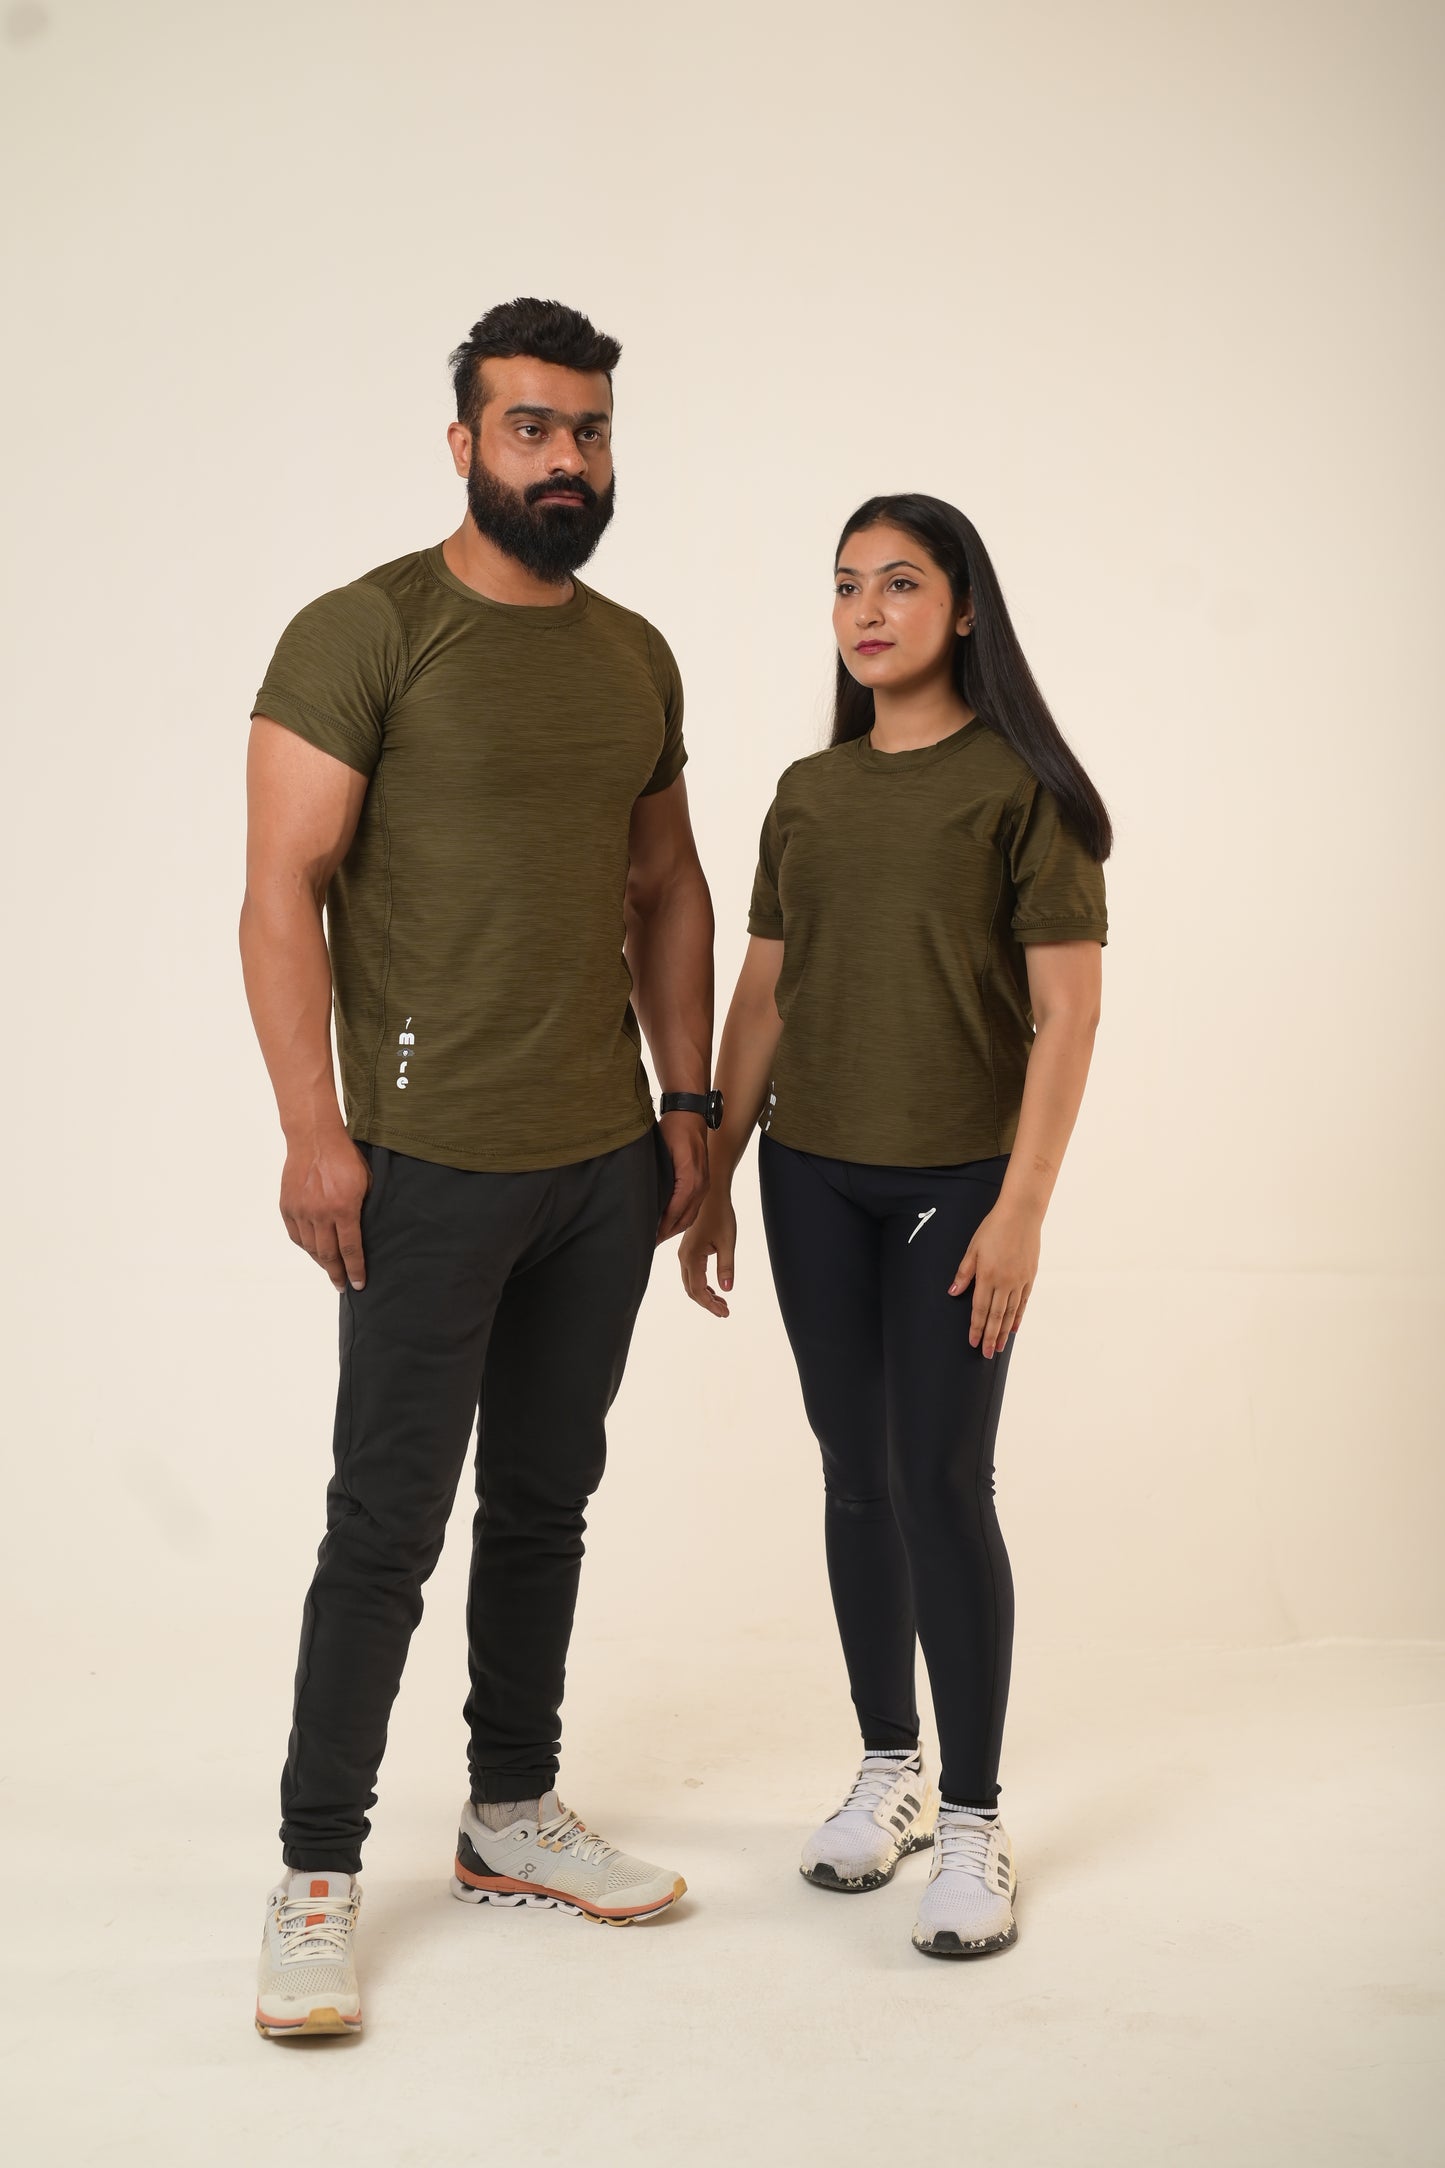 Dry fit olive green tee shirt